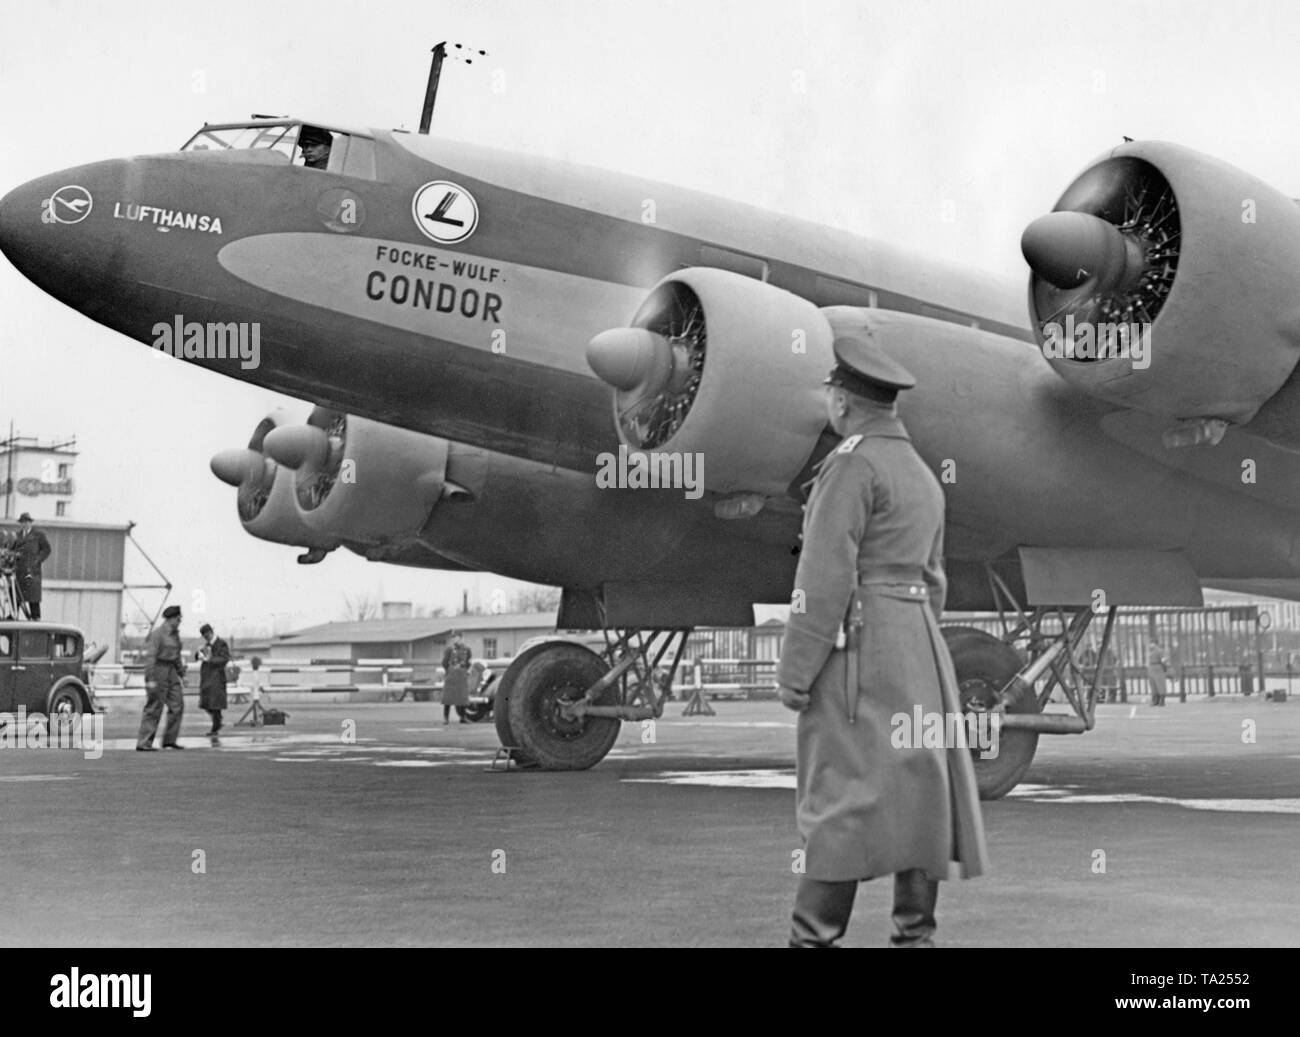 A four-engine Focke-Wulf FW 200 Condor of the Lufthansa before its takeoff. Stock Photo